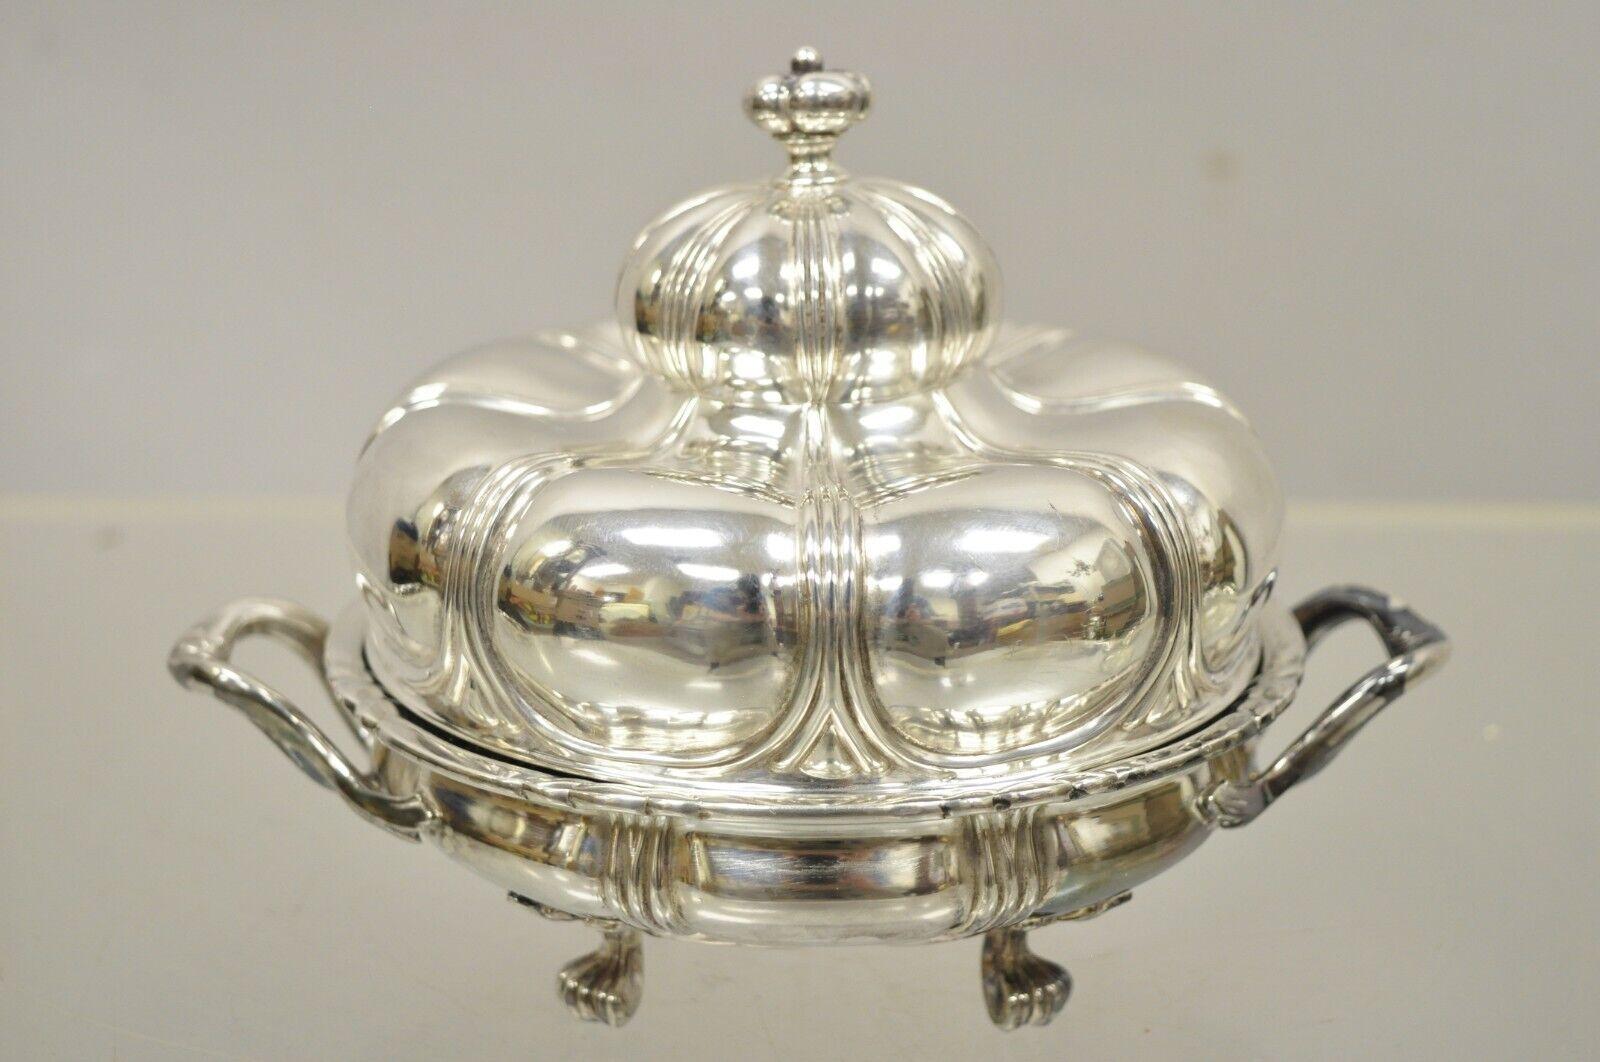 Vintage Pairpoint Silver Plated Covered Butter Bowl Covered Dish with Glass 7